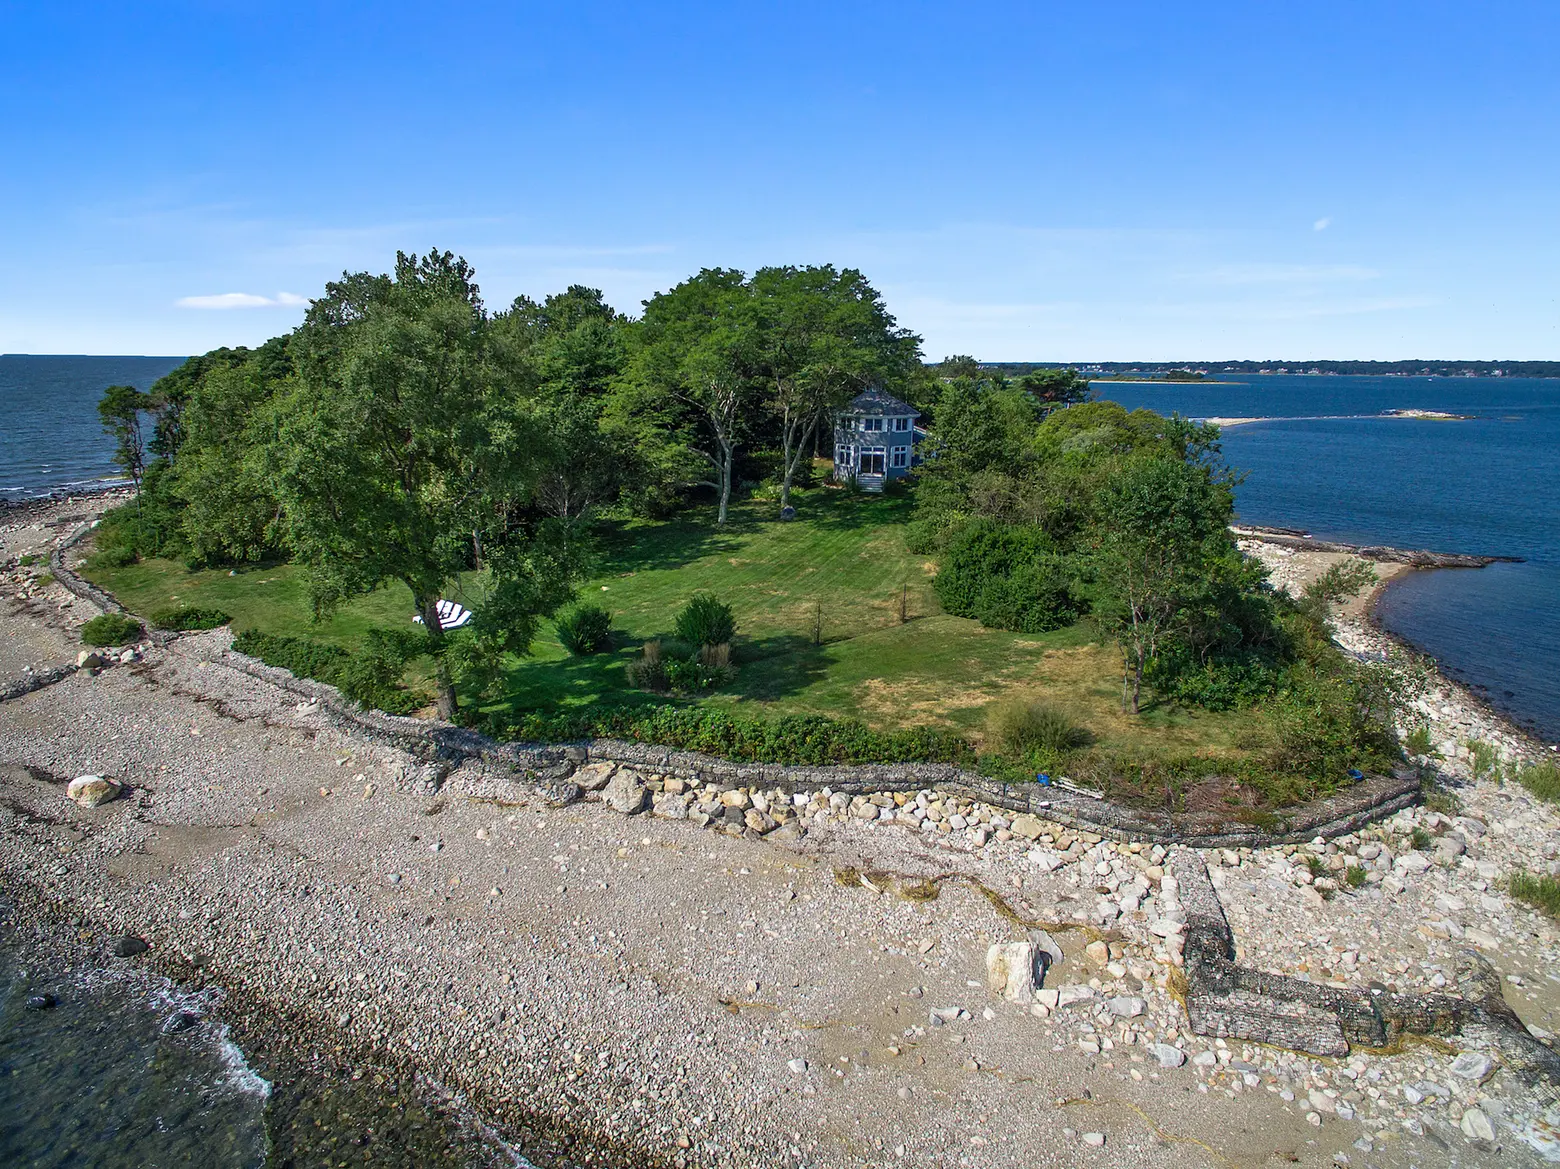 Six-acre private island in Connecticut with a charming cottage asks $2.5M